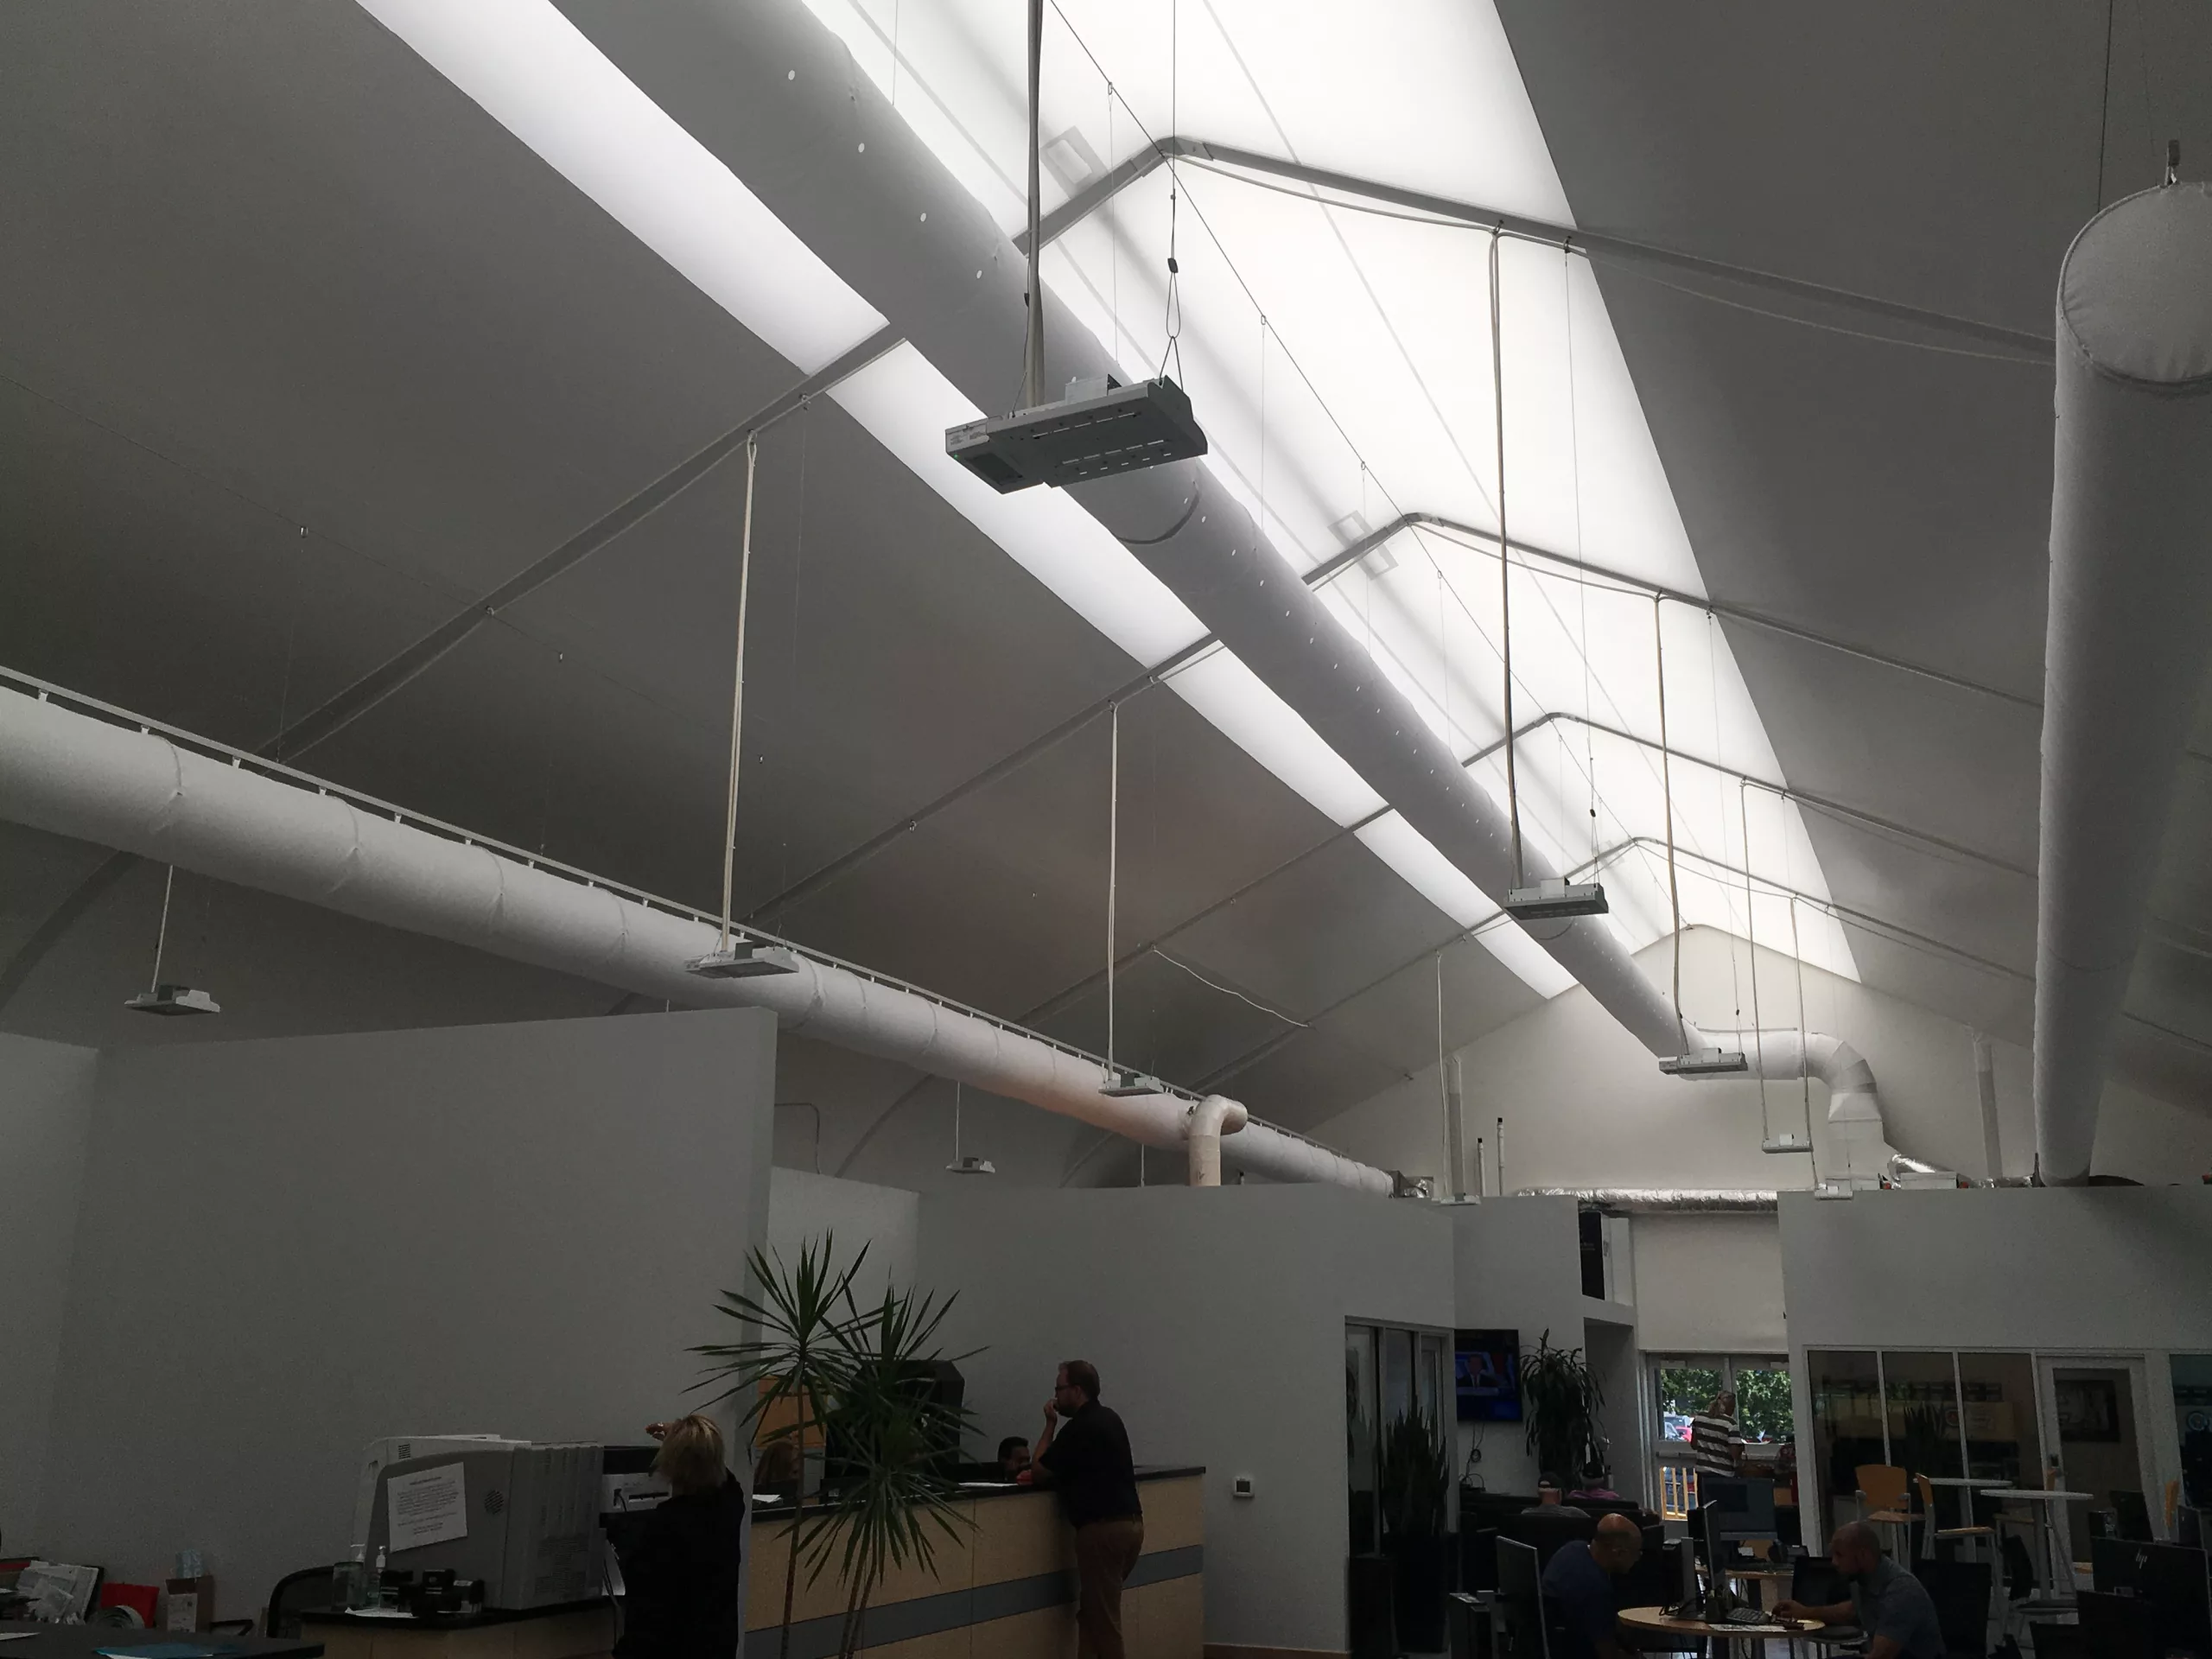 FabricAir fabric duct installed in a temporary office space